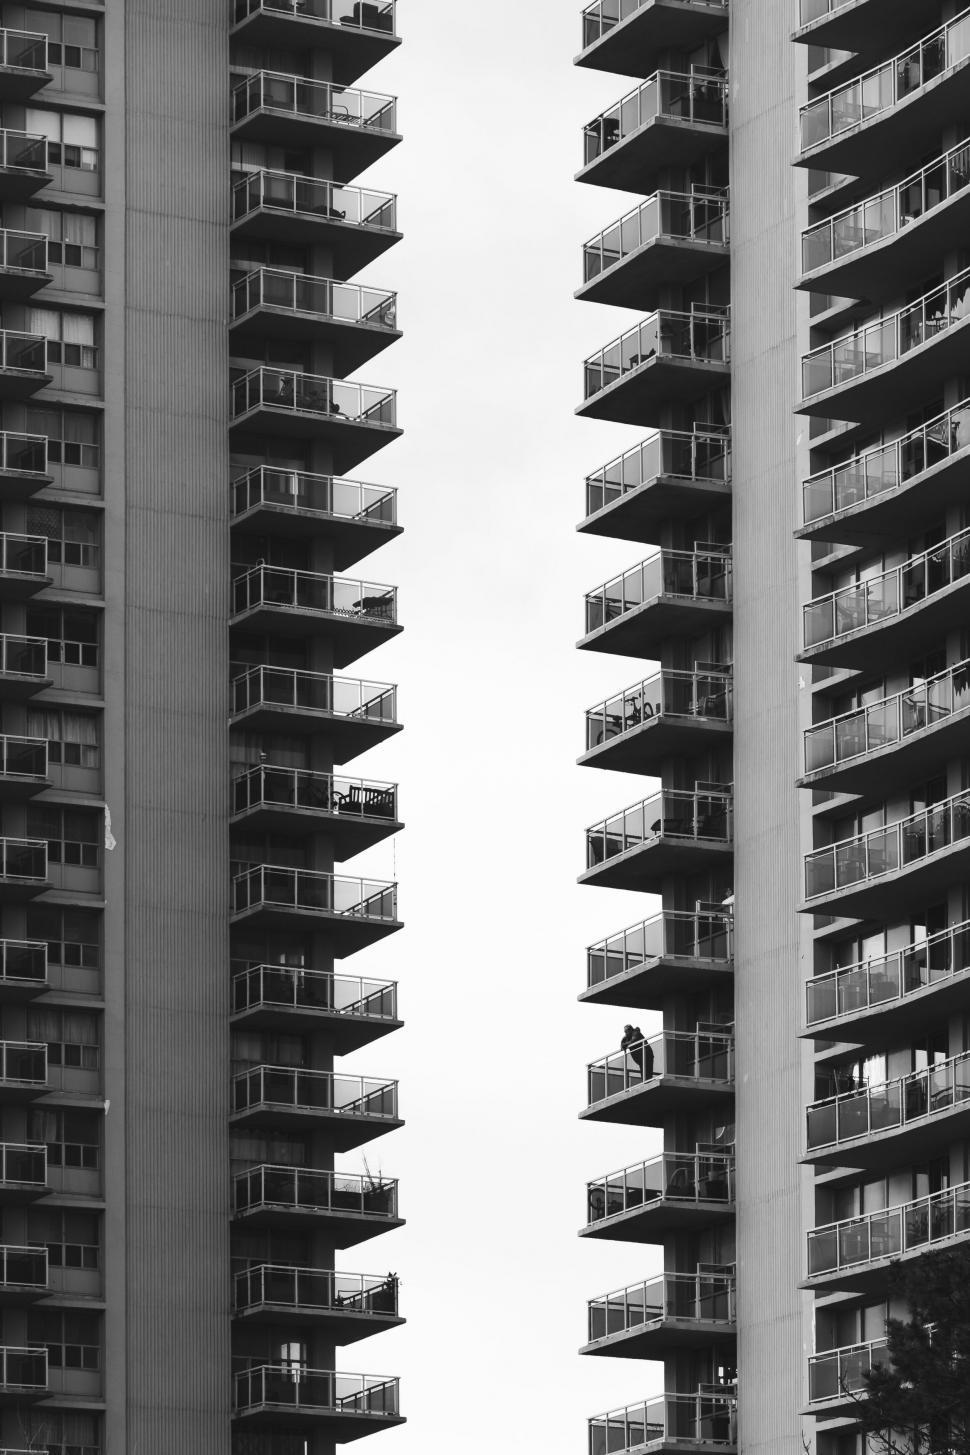 Free Image of Symmetrical twin skyscrapers in monochrome 